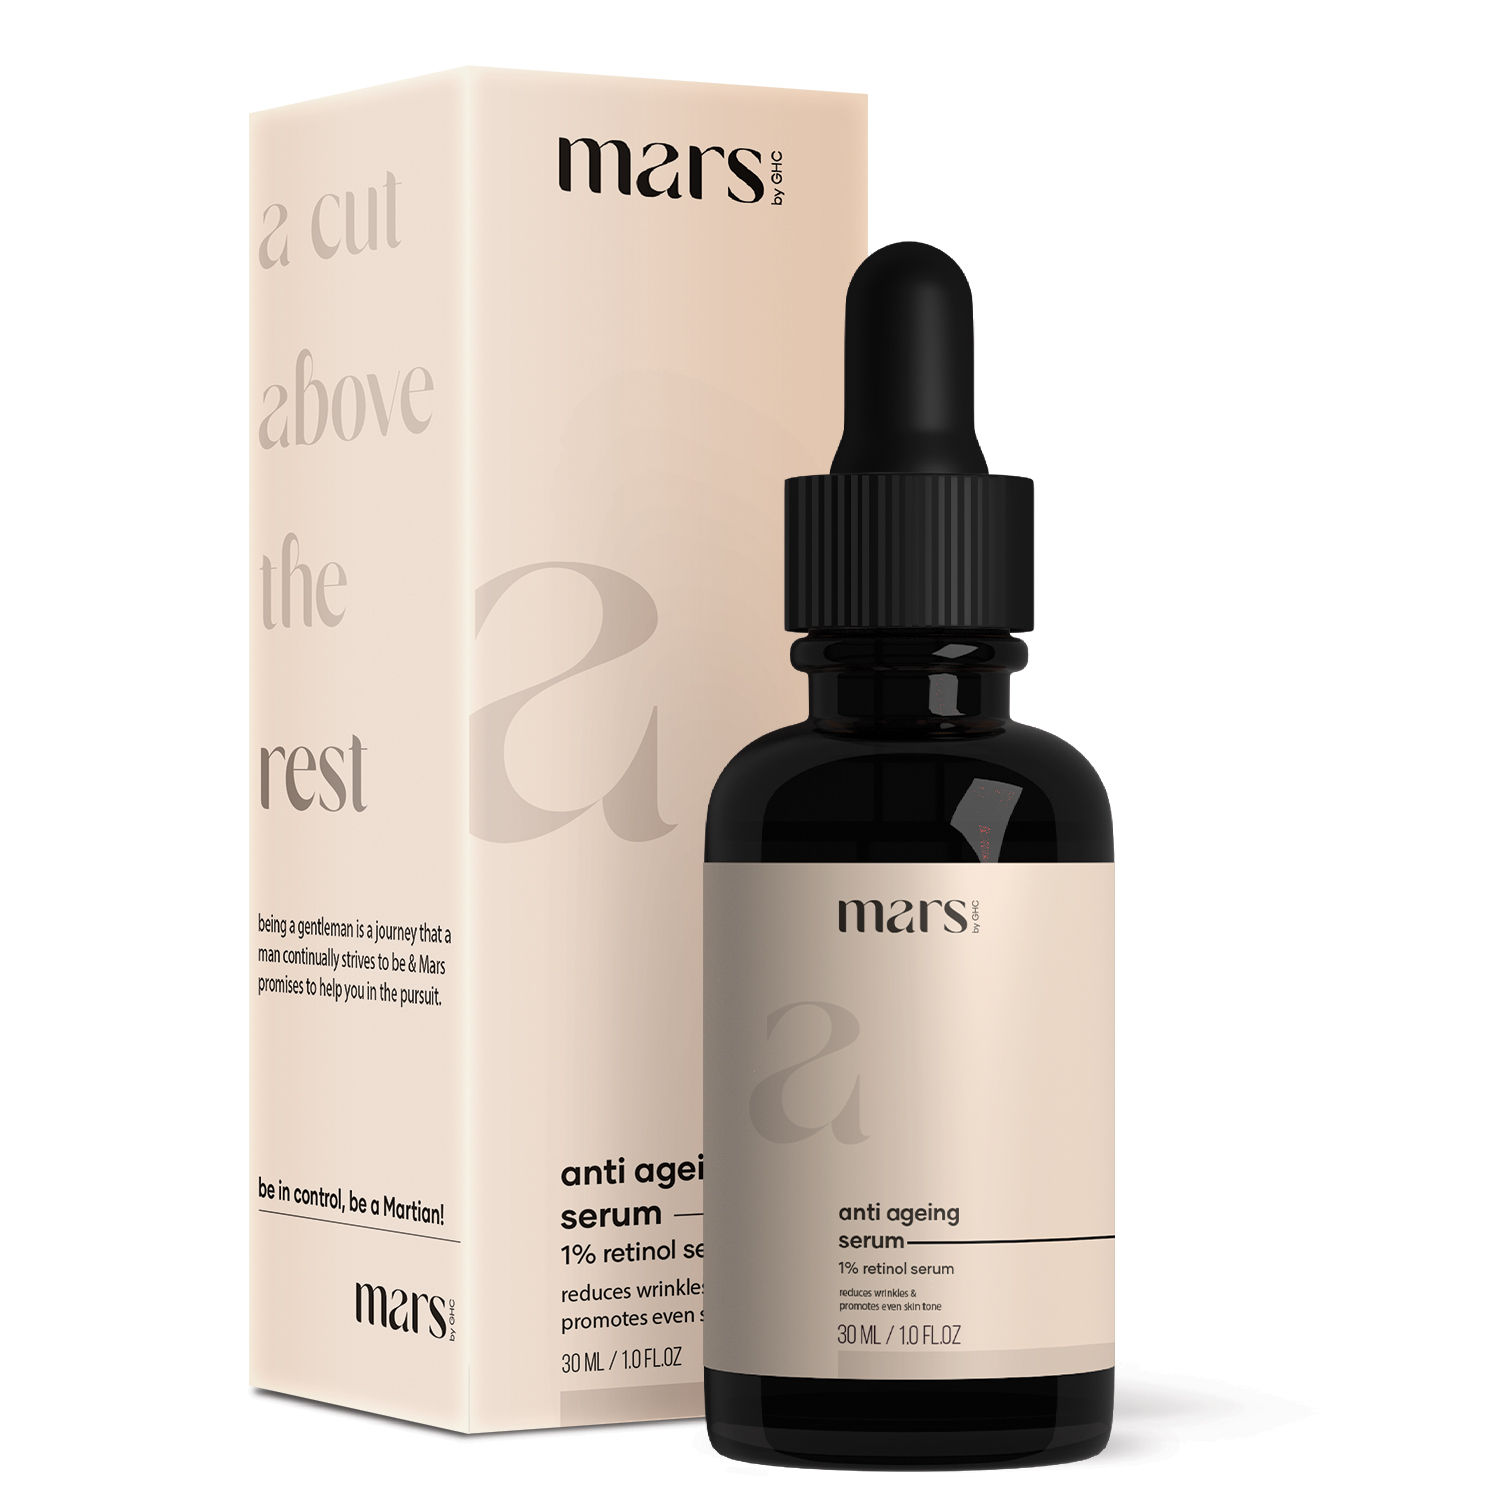 Buy mars by GHC Niacinamide Anti Ageing Face Serum That Controls Wrinkles and Reduces Signs Of Ageing | Powered With Retinol, Hyaluronic Acid & Vitamin C , 30ml - Purplle